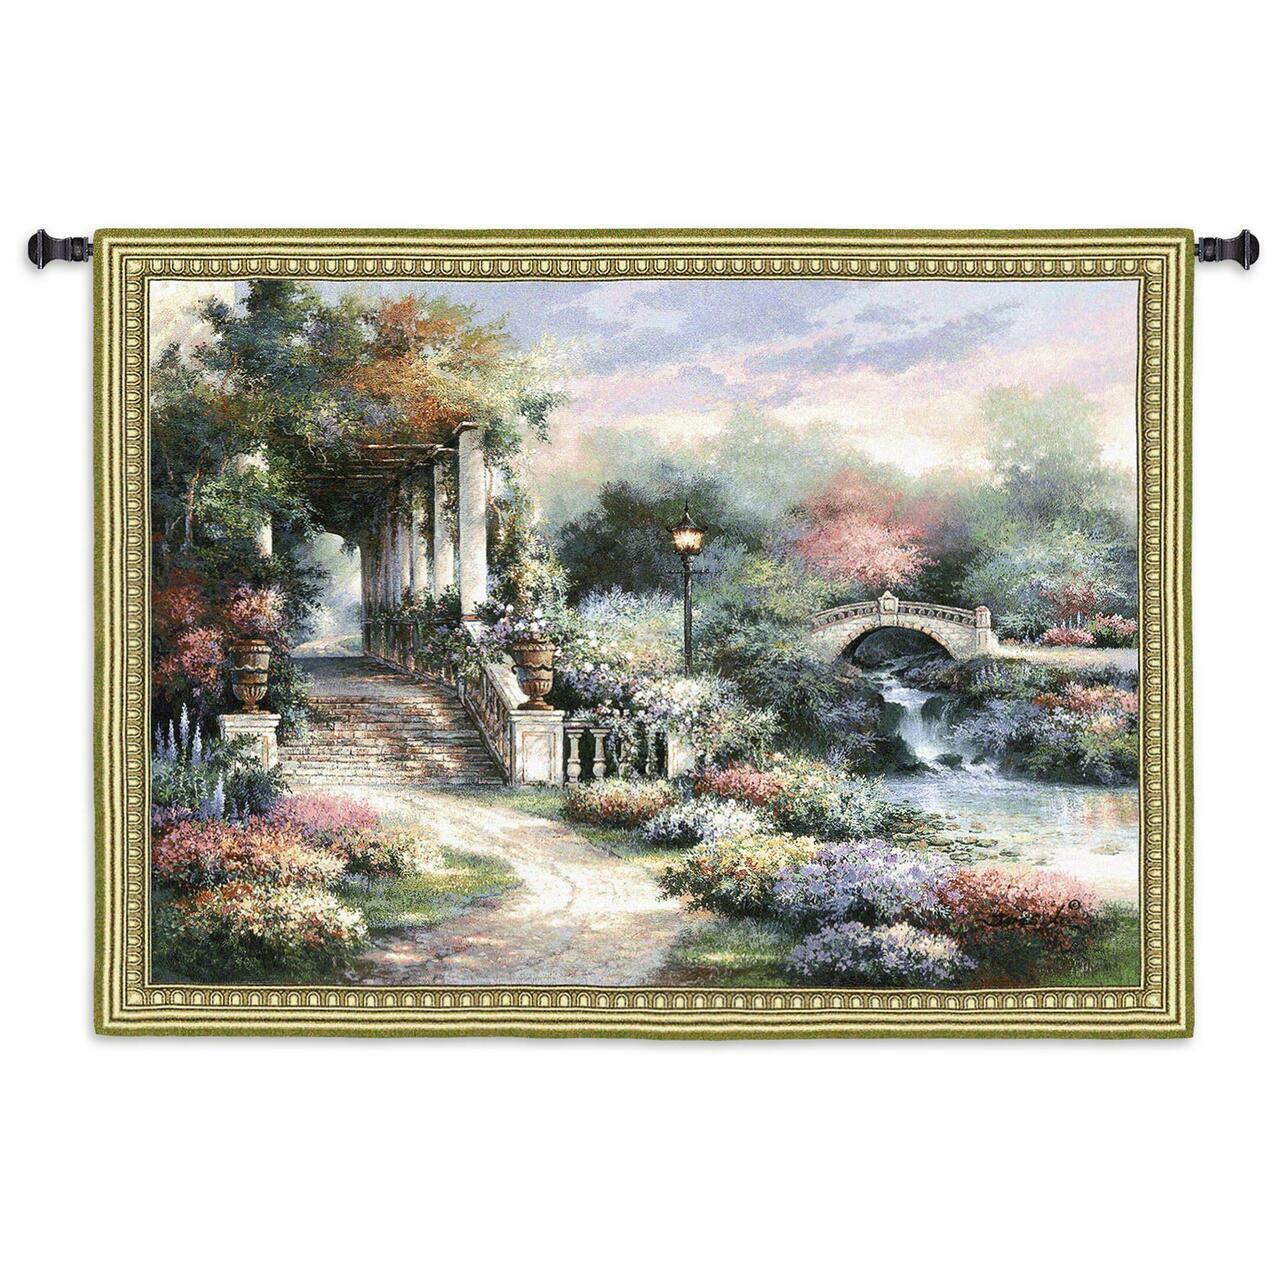 53x42 GARDEN RETREAT Floral Flower River Landscape Nature Tapestry Wall Hanging - $168.30